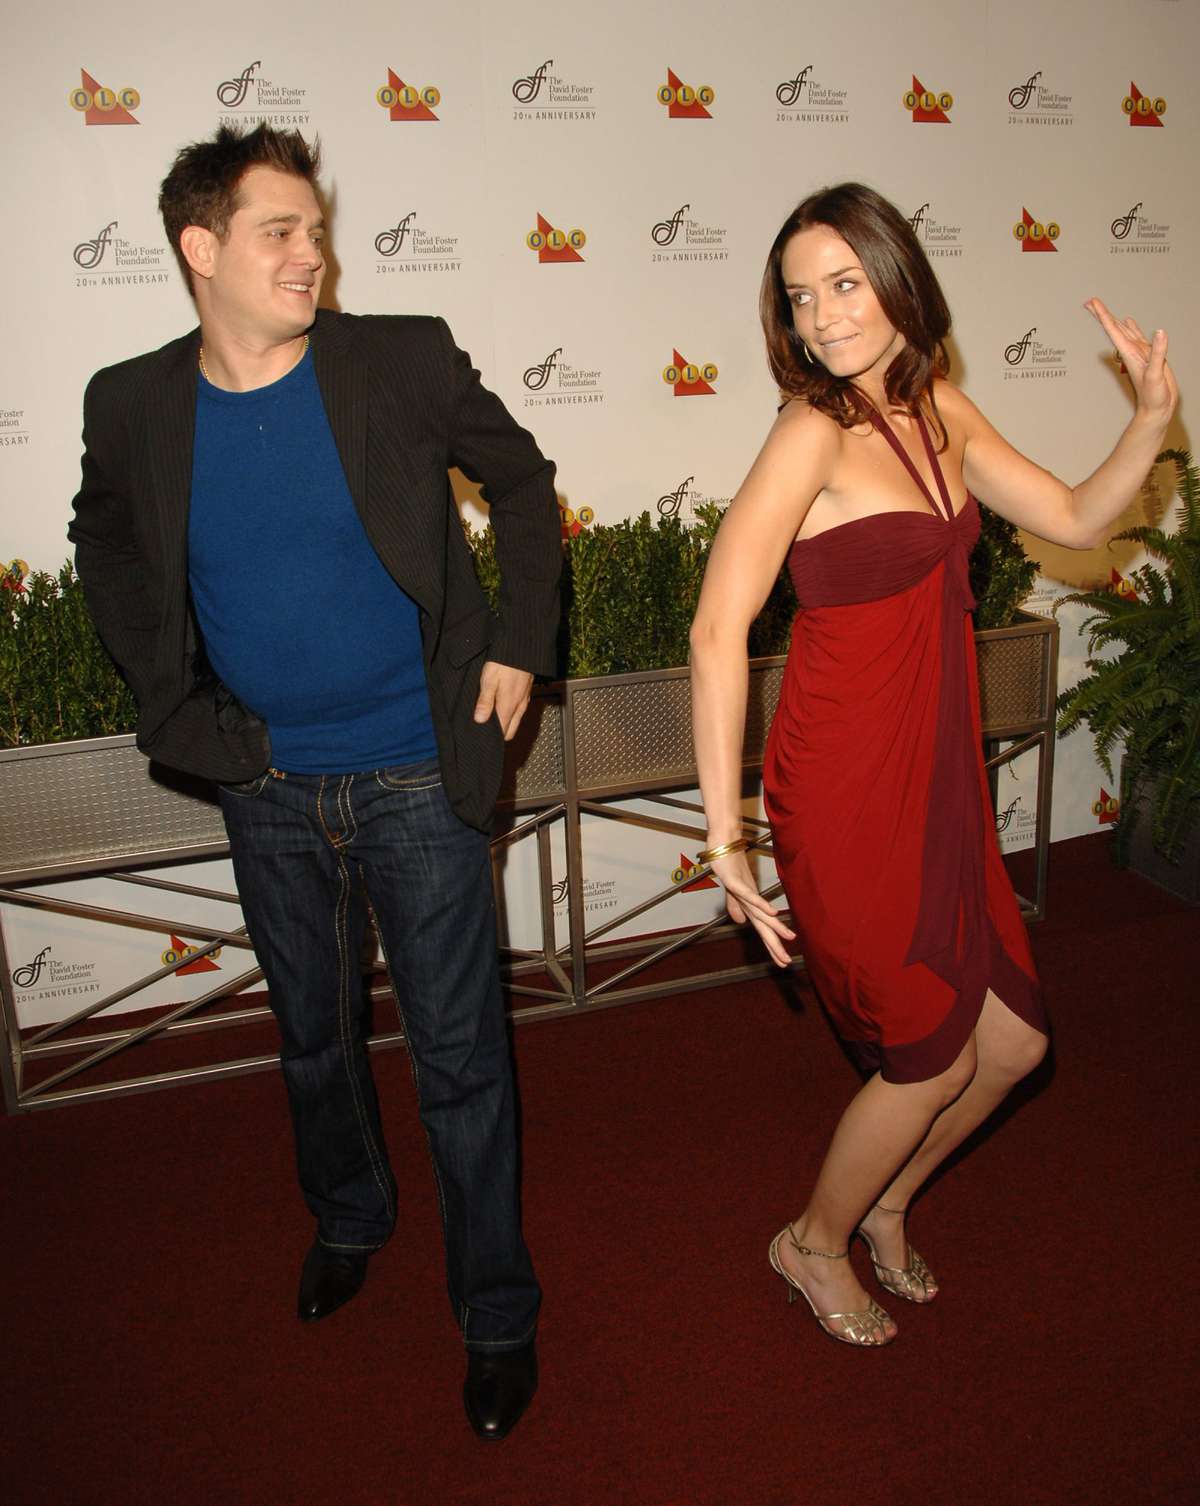 TBT: Emily Blunt and Michael Bublé